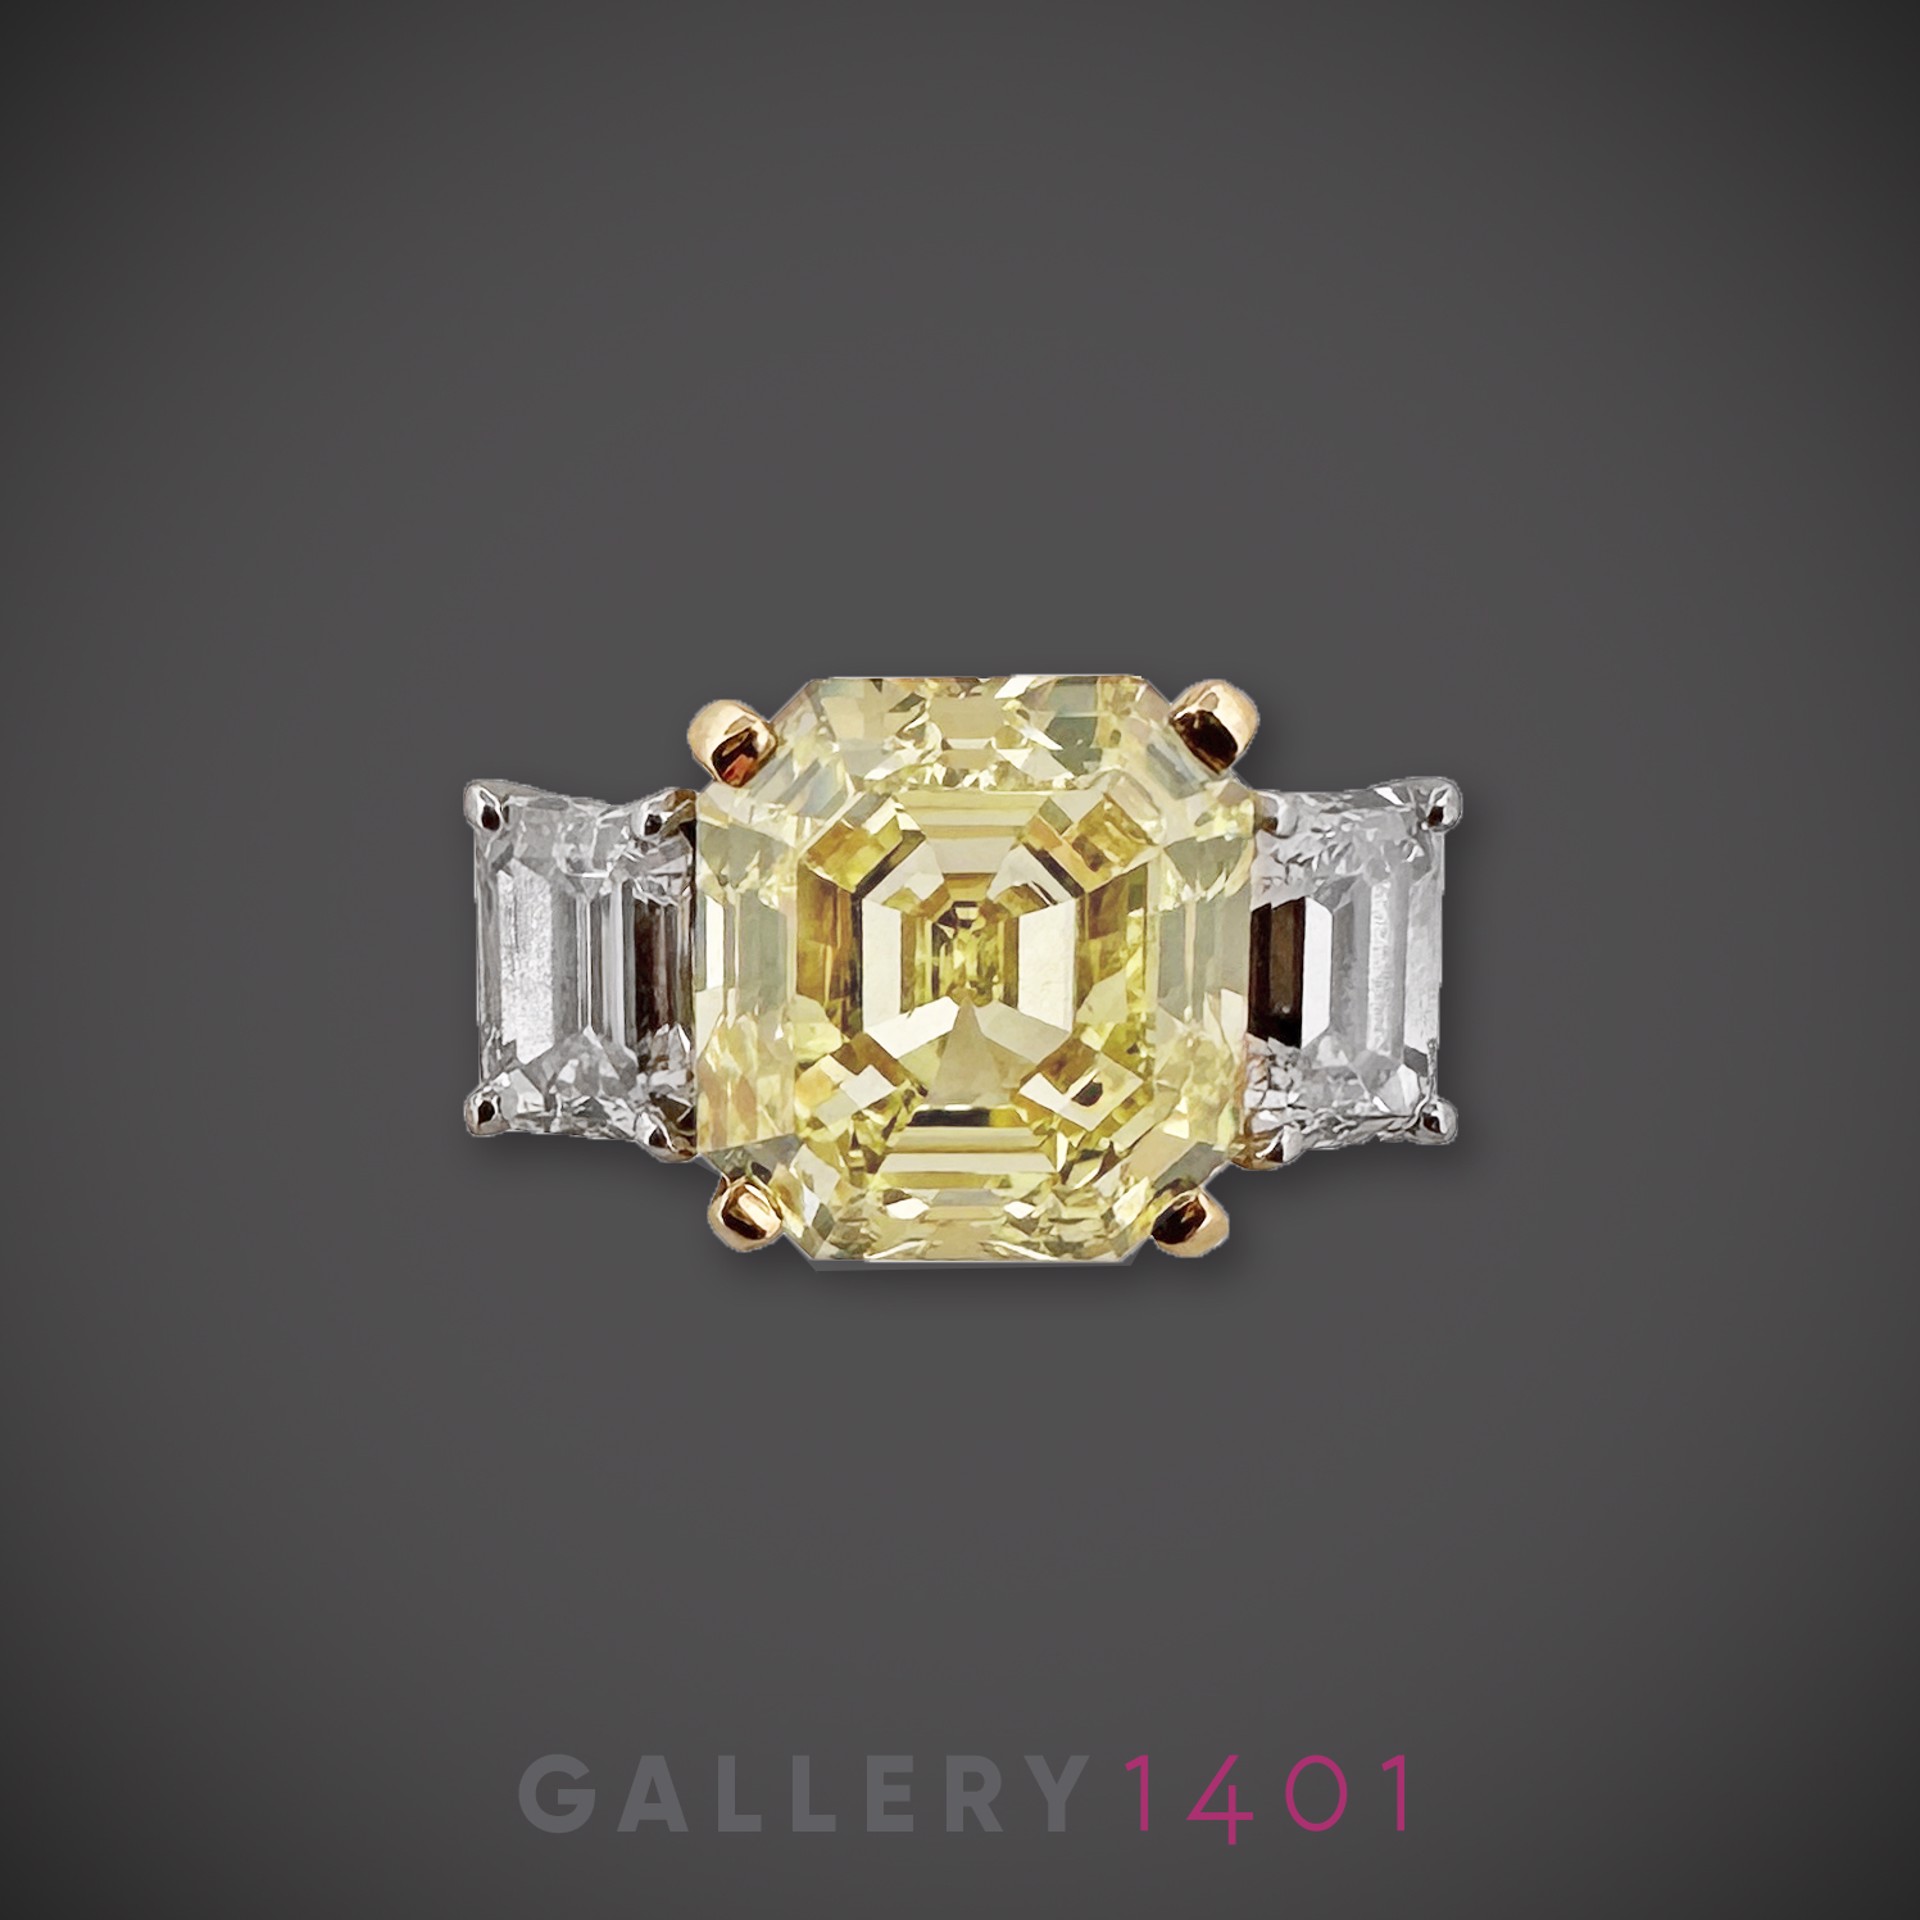 7.03ct Fancy Intense Yellow Diamond Lab Report, GIA by Carley Jewels